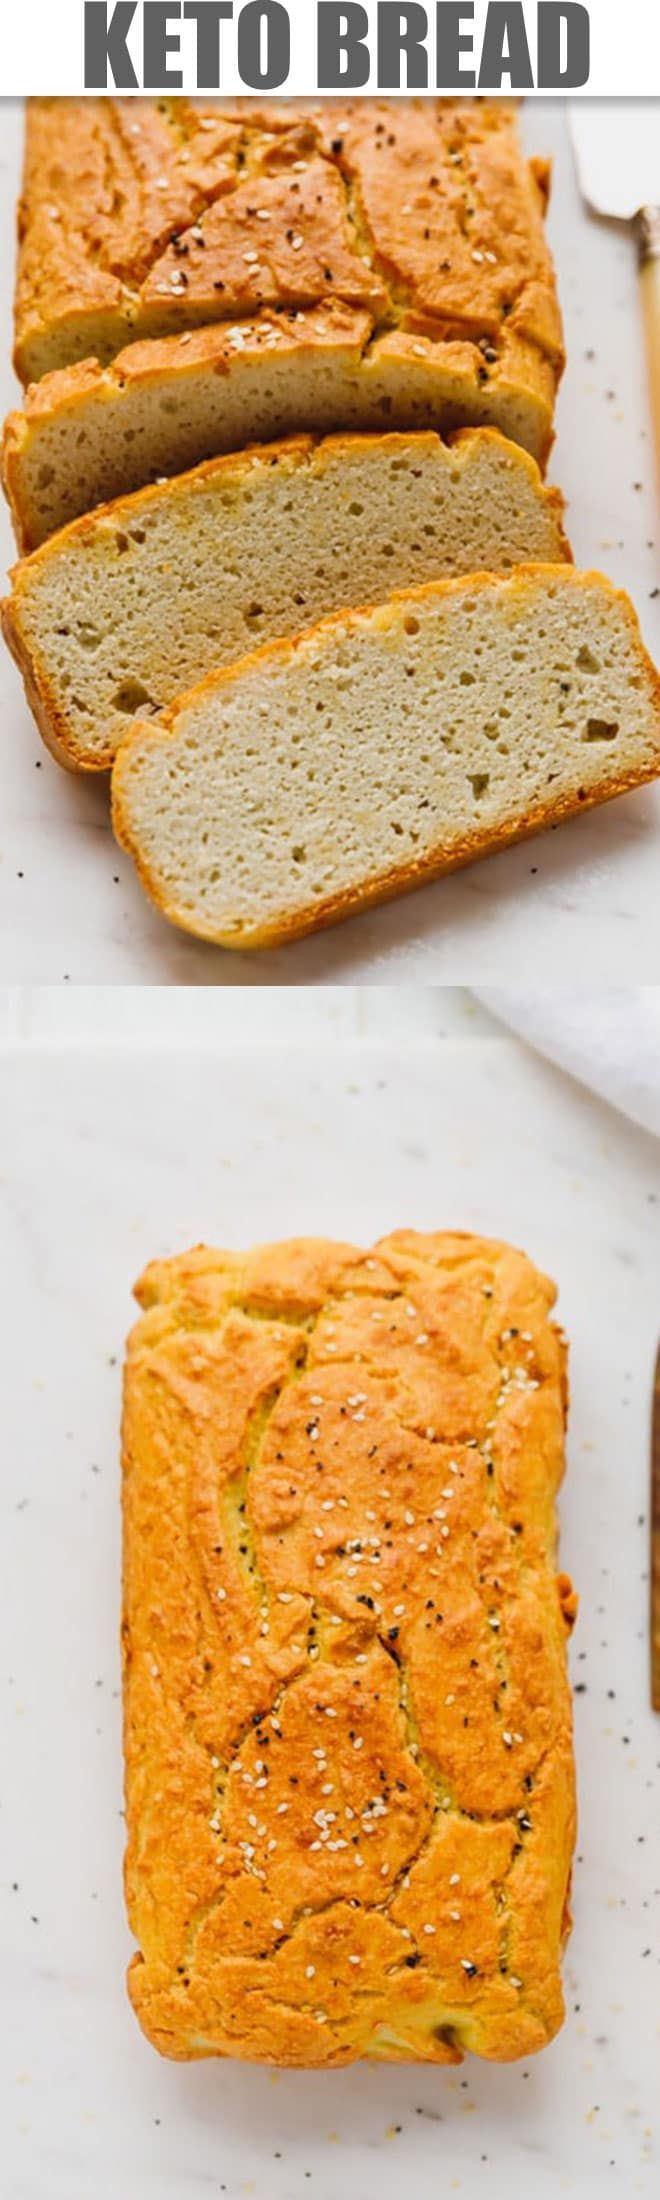 Non Carbohydrate Bread
 Keto Bread Loaf low carb non eggy gluten and sugar